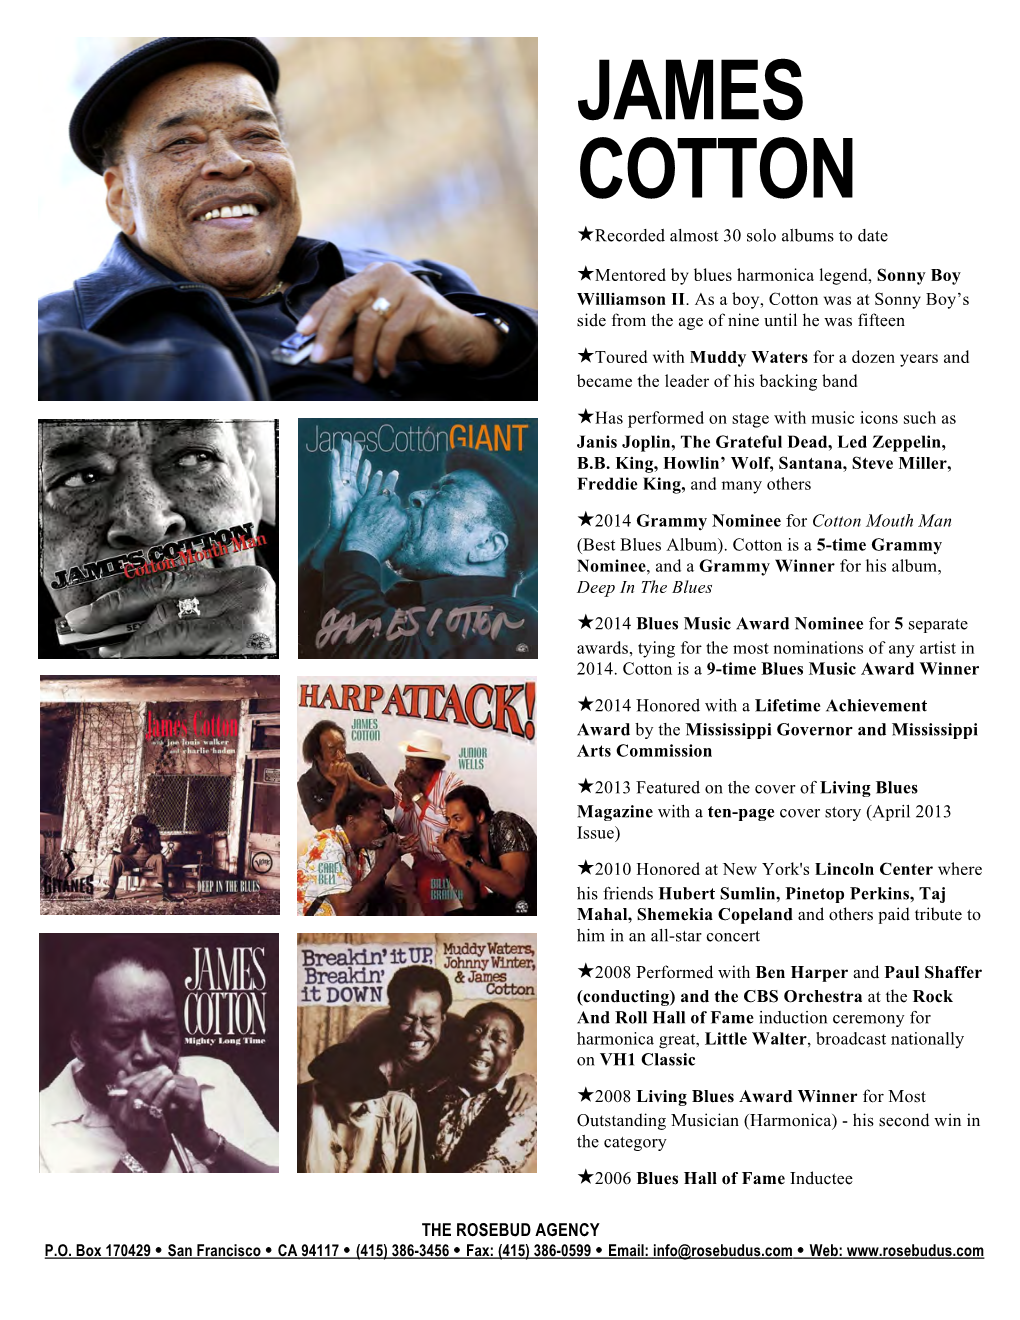 JAMES COTTON ★Recorded Almost 30 Solo Albums to Date